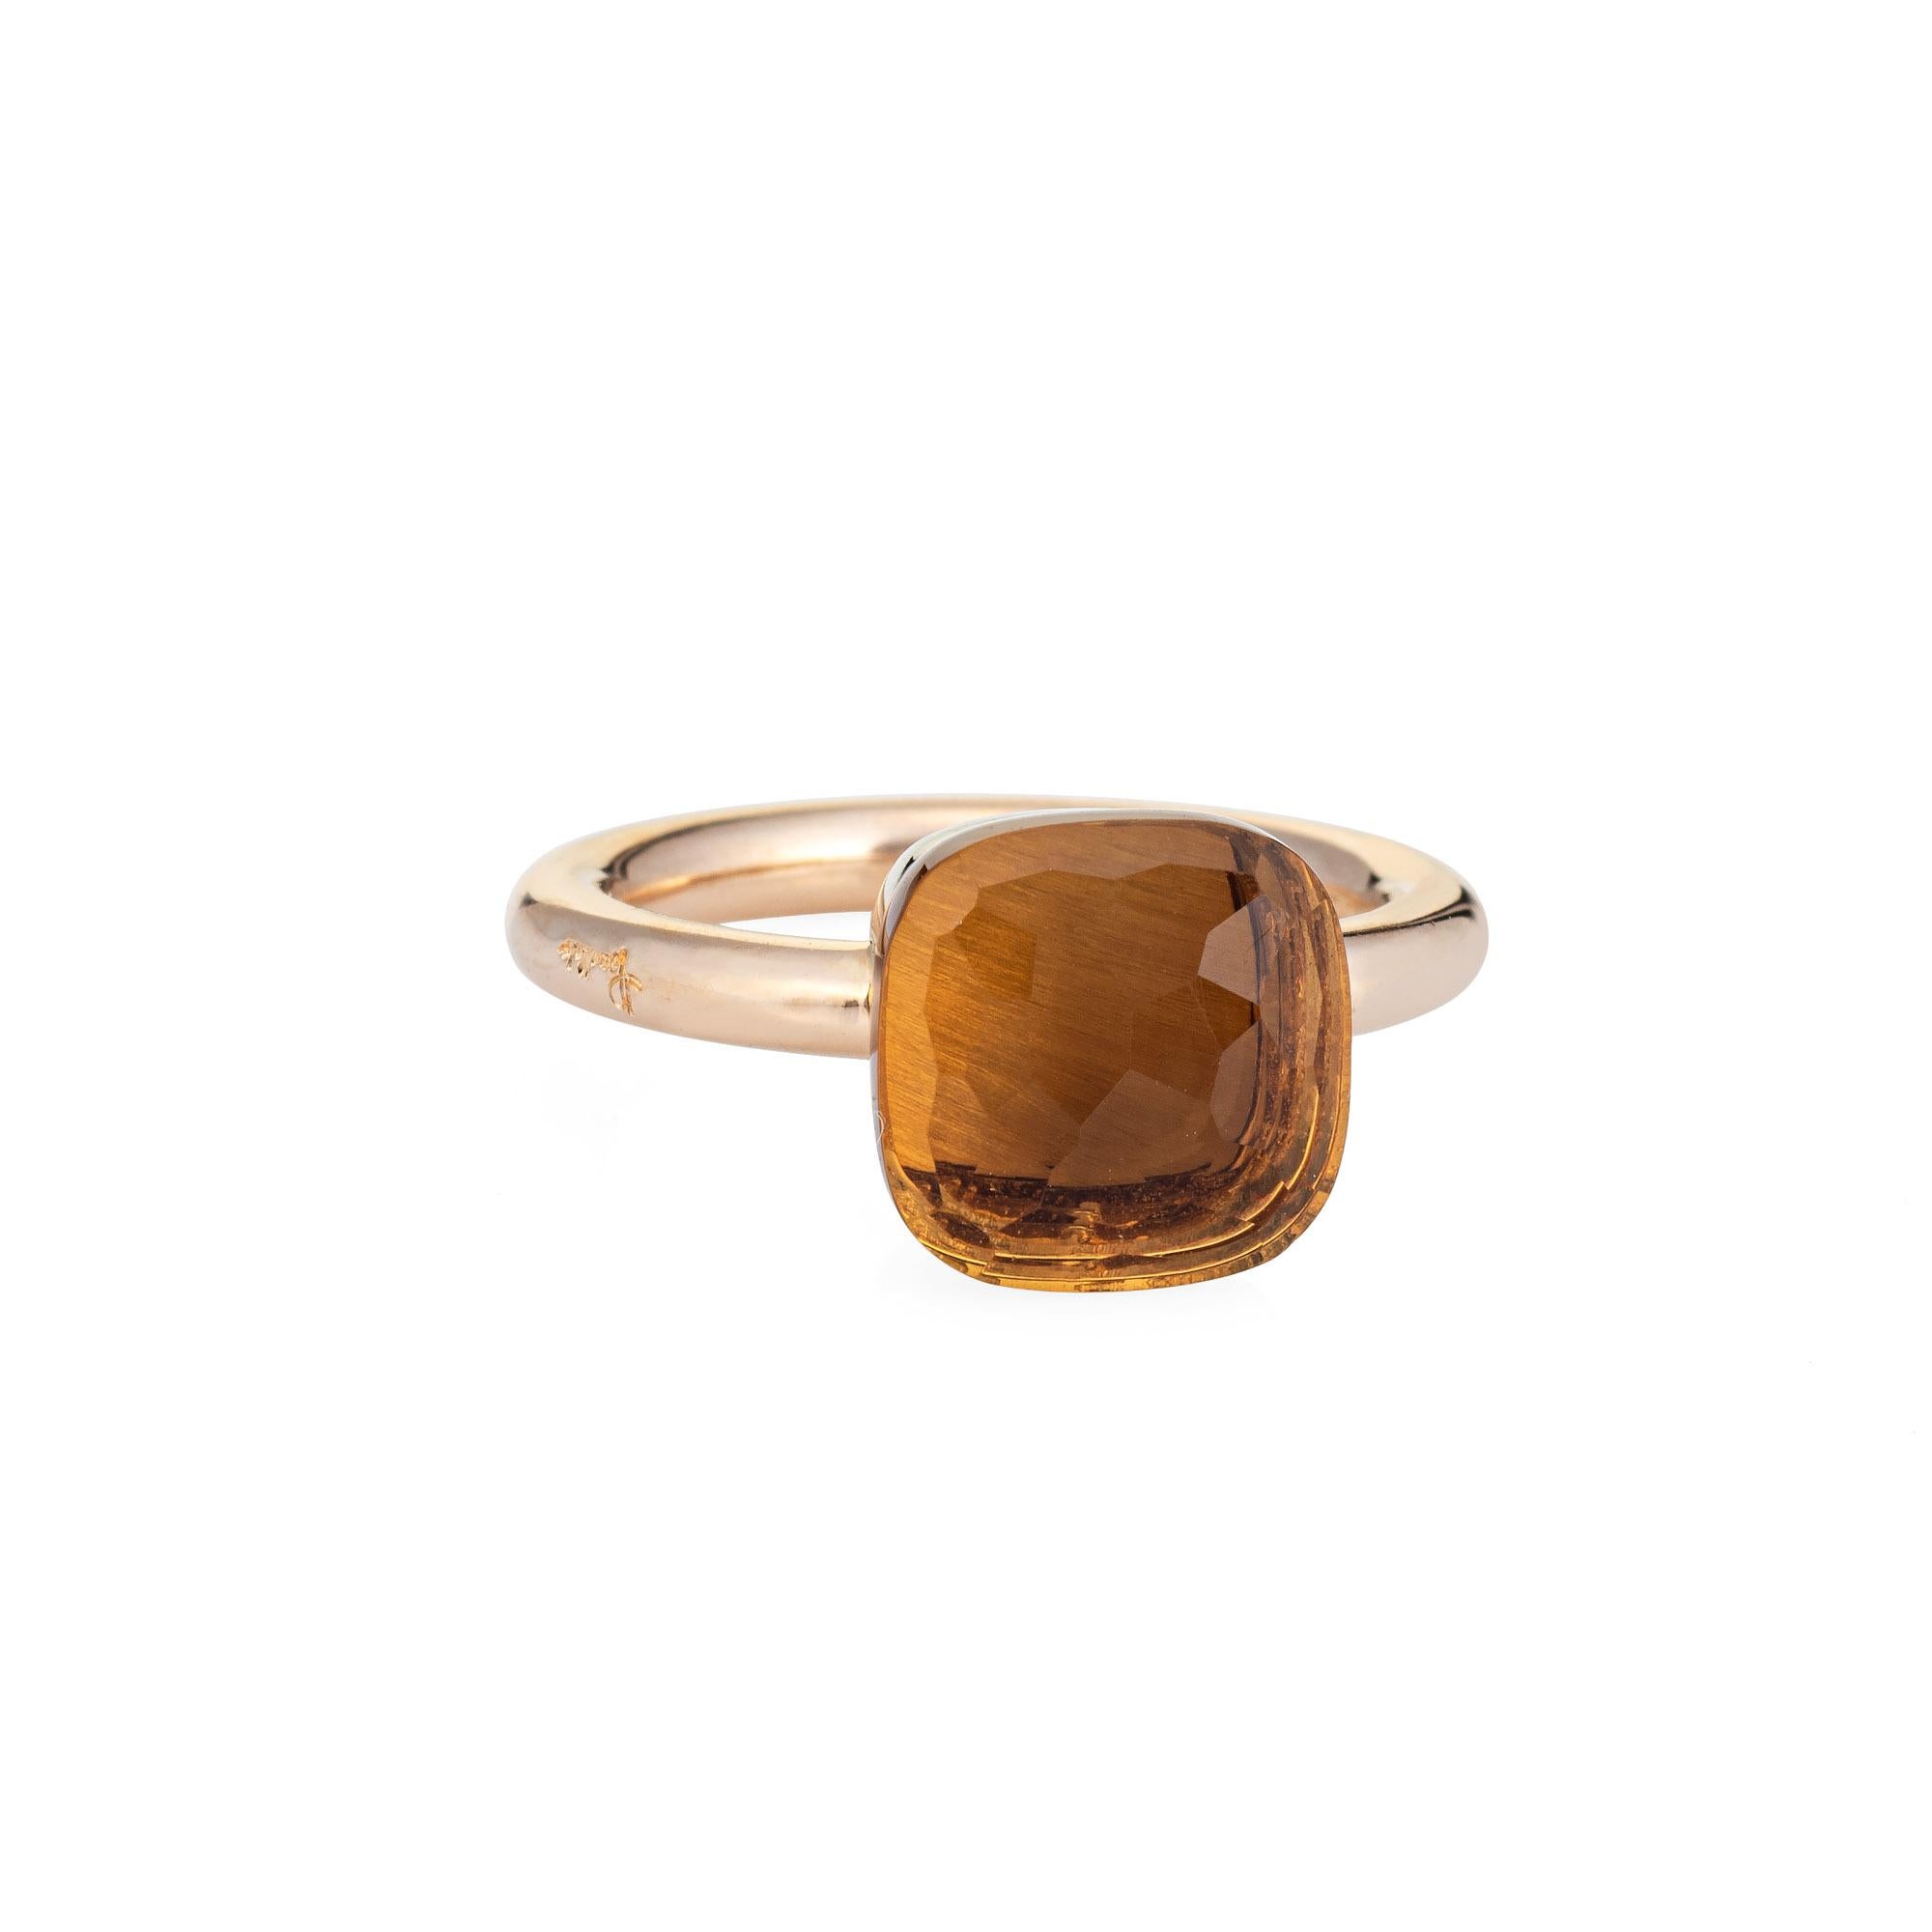 Finely detailed estate Pomellato citrine Nudo ring, crafted in 18 karat yellow gold. 

Faceted citrine measures 10.5mm x 10.5mm. The citrine is in good condition with a few light surface abrasions visible under a 10x loupe.   

The ring is in good